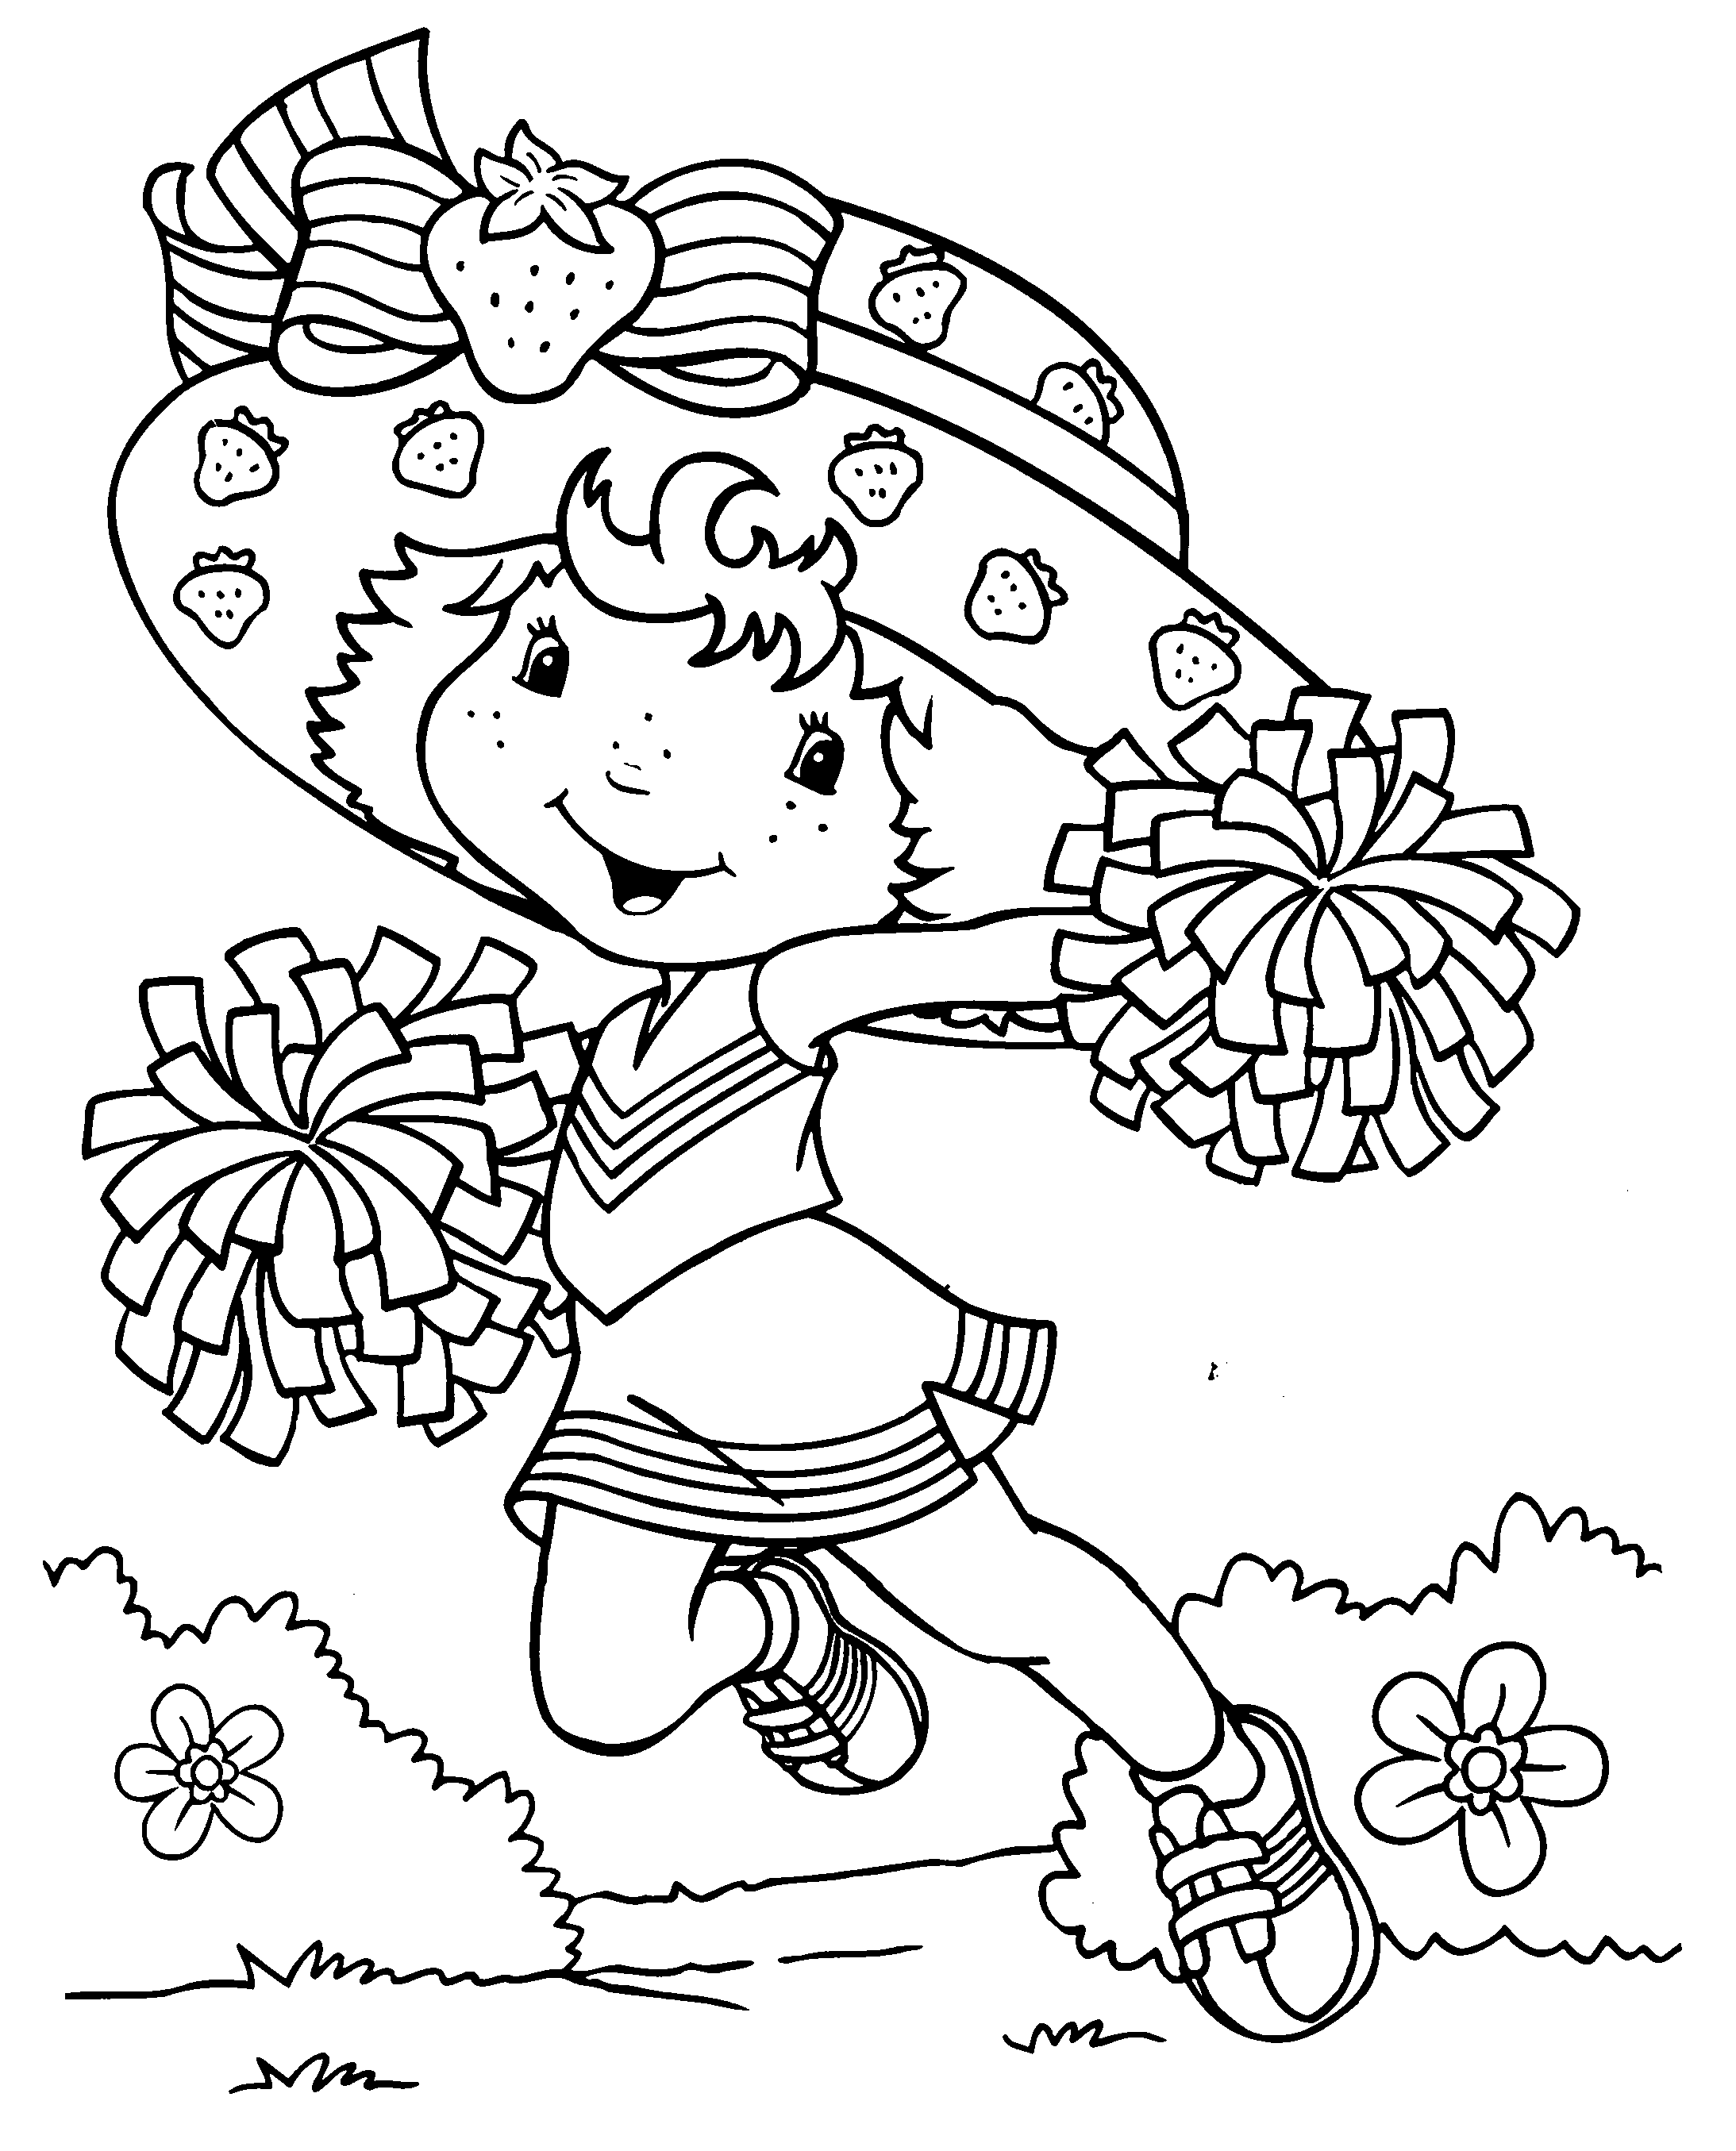 Strawberry Shortcake | Vintage Coloring Book and Accessories